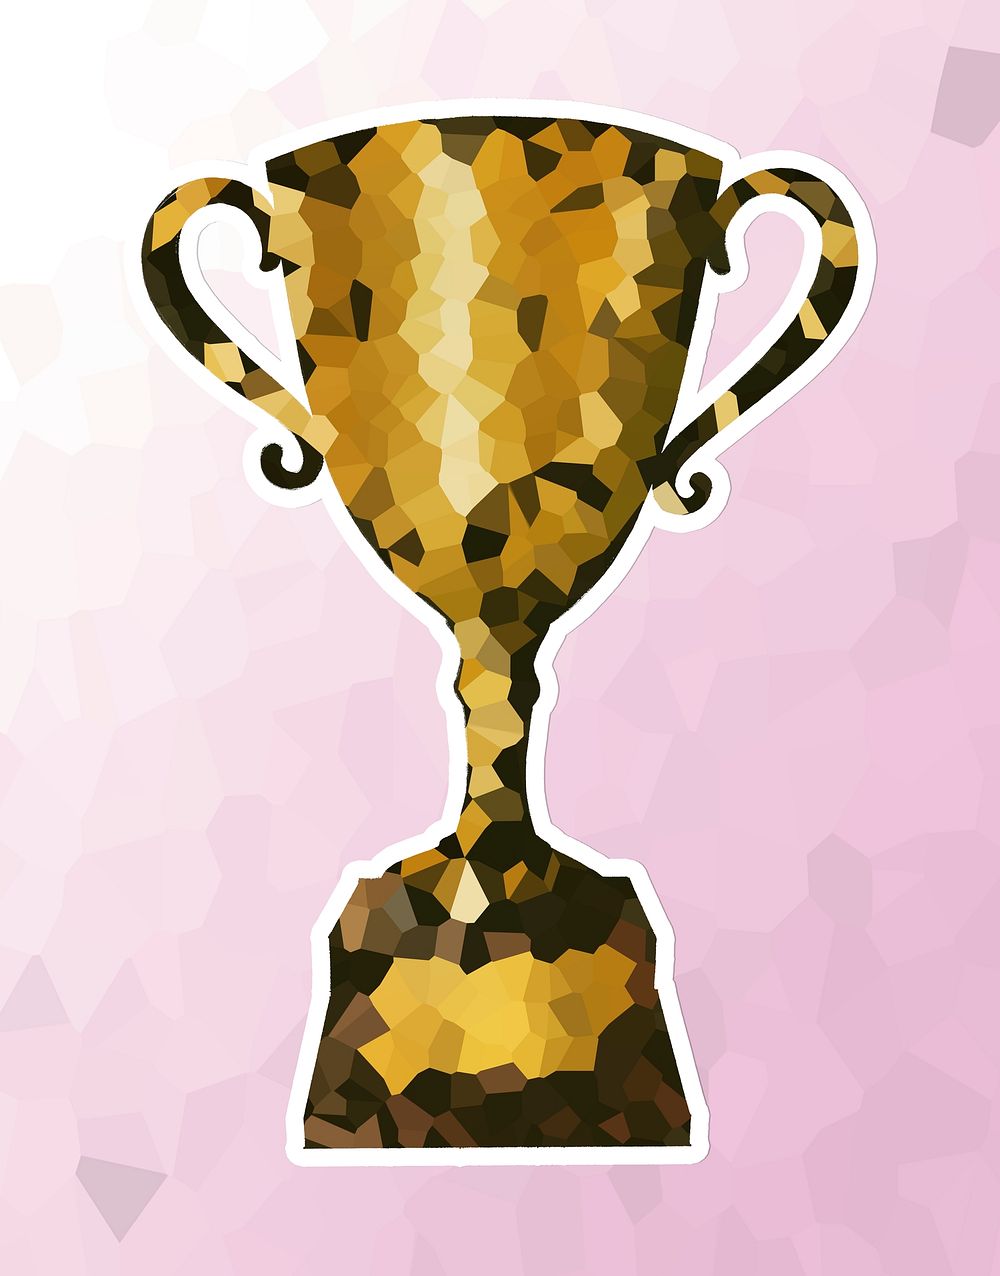 Crystallized style trophy illustration with a white border sticker